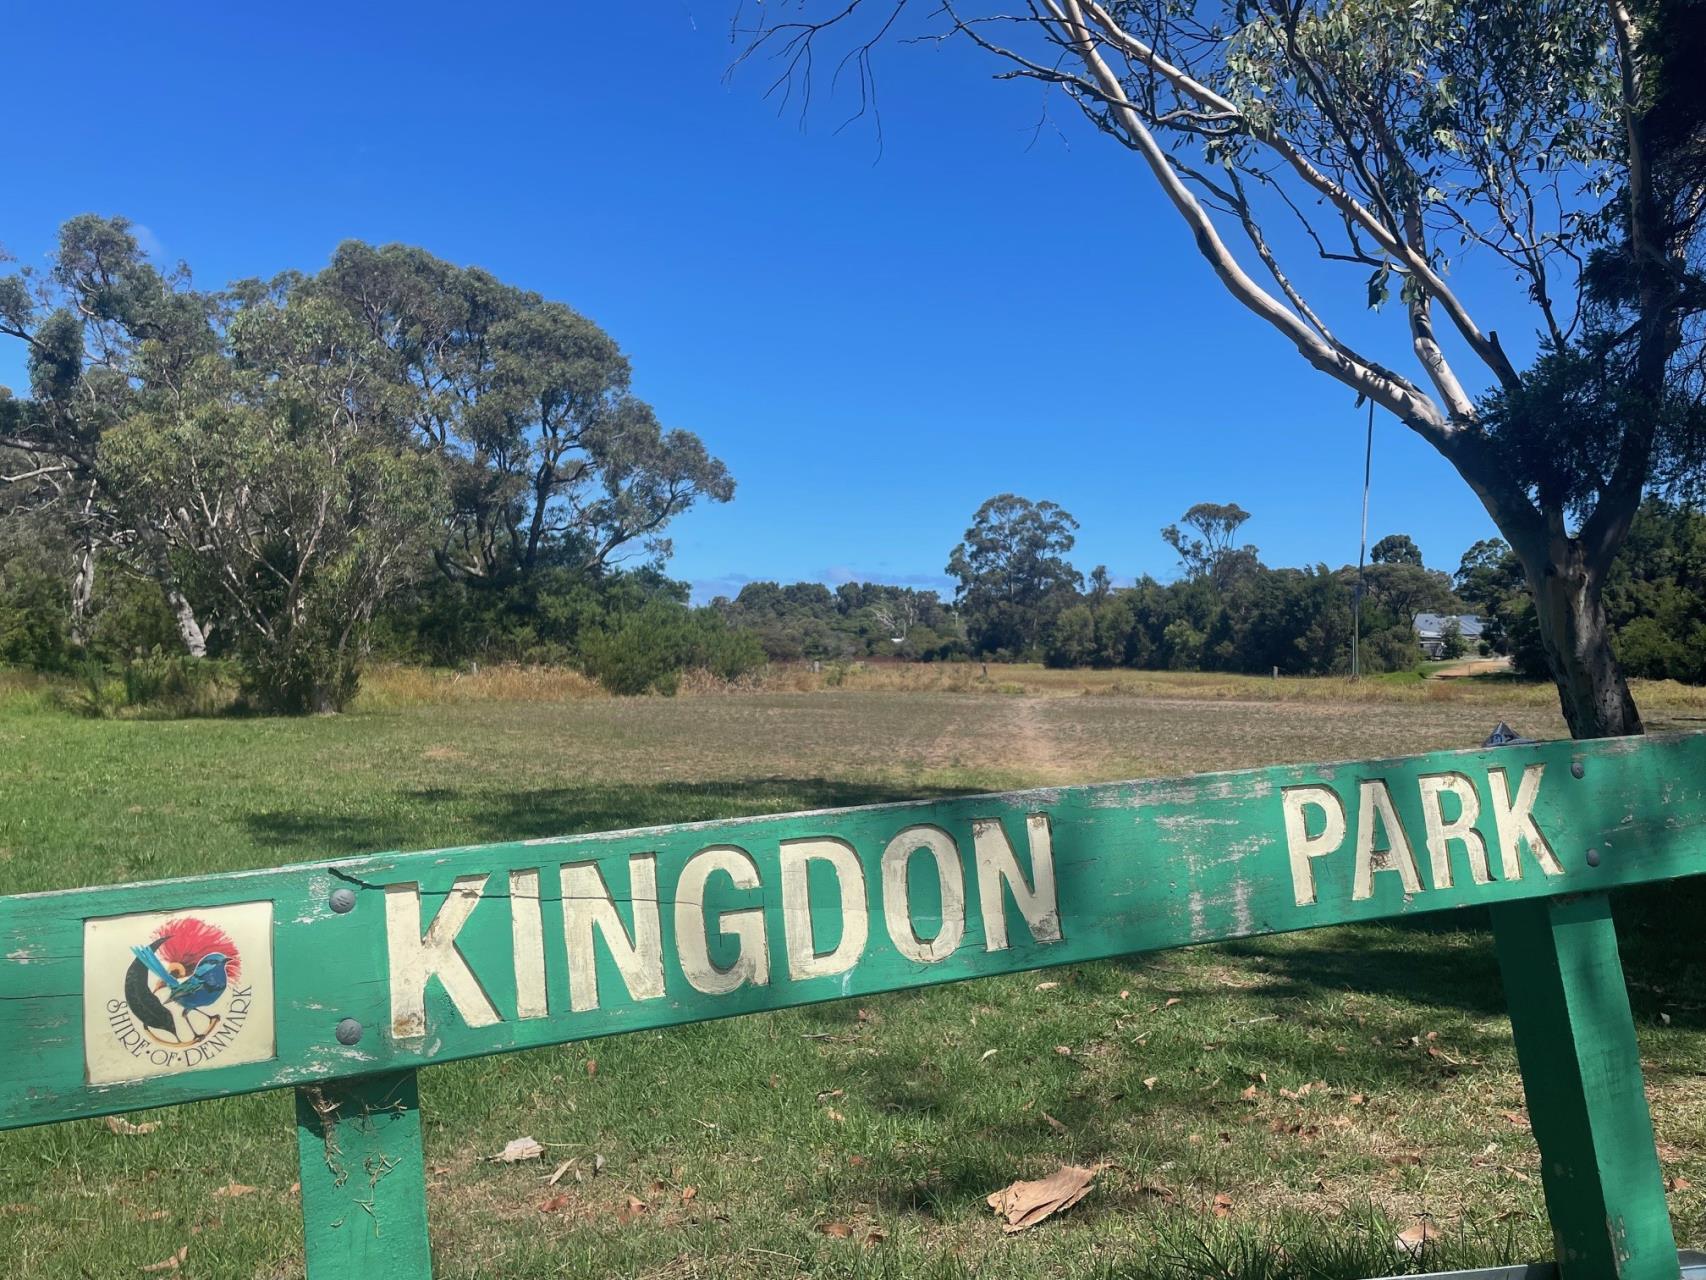 Consultation Win for Kingdon Park: Council Listens to Community